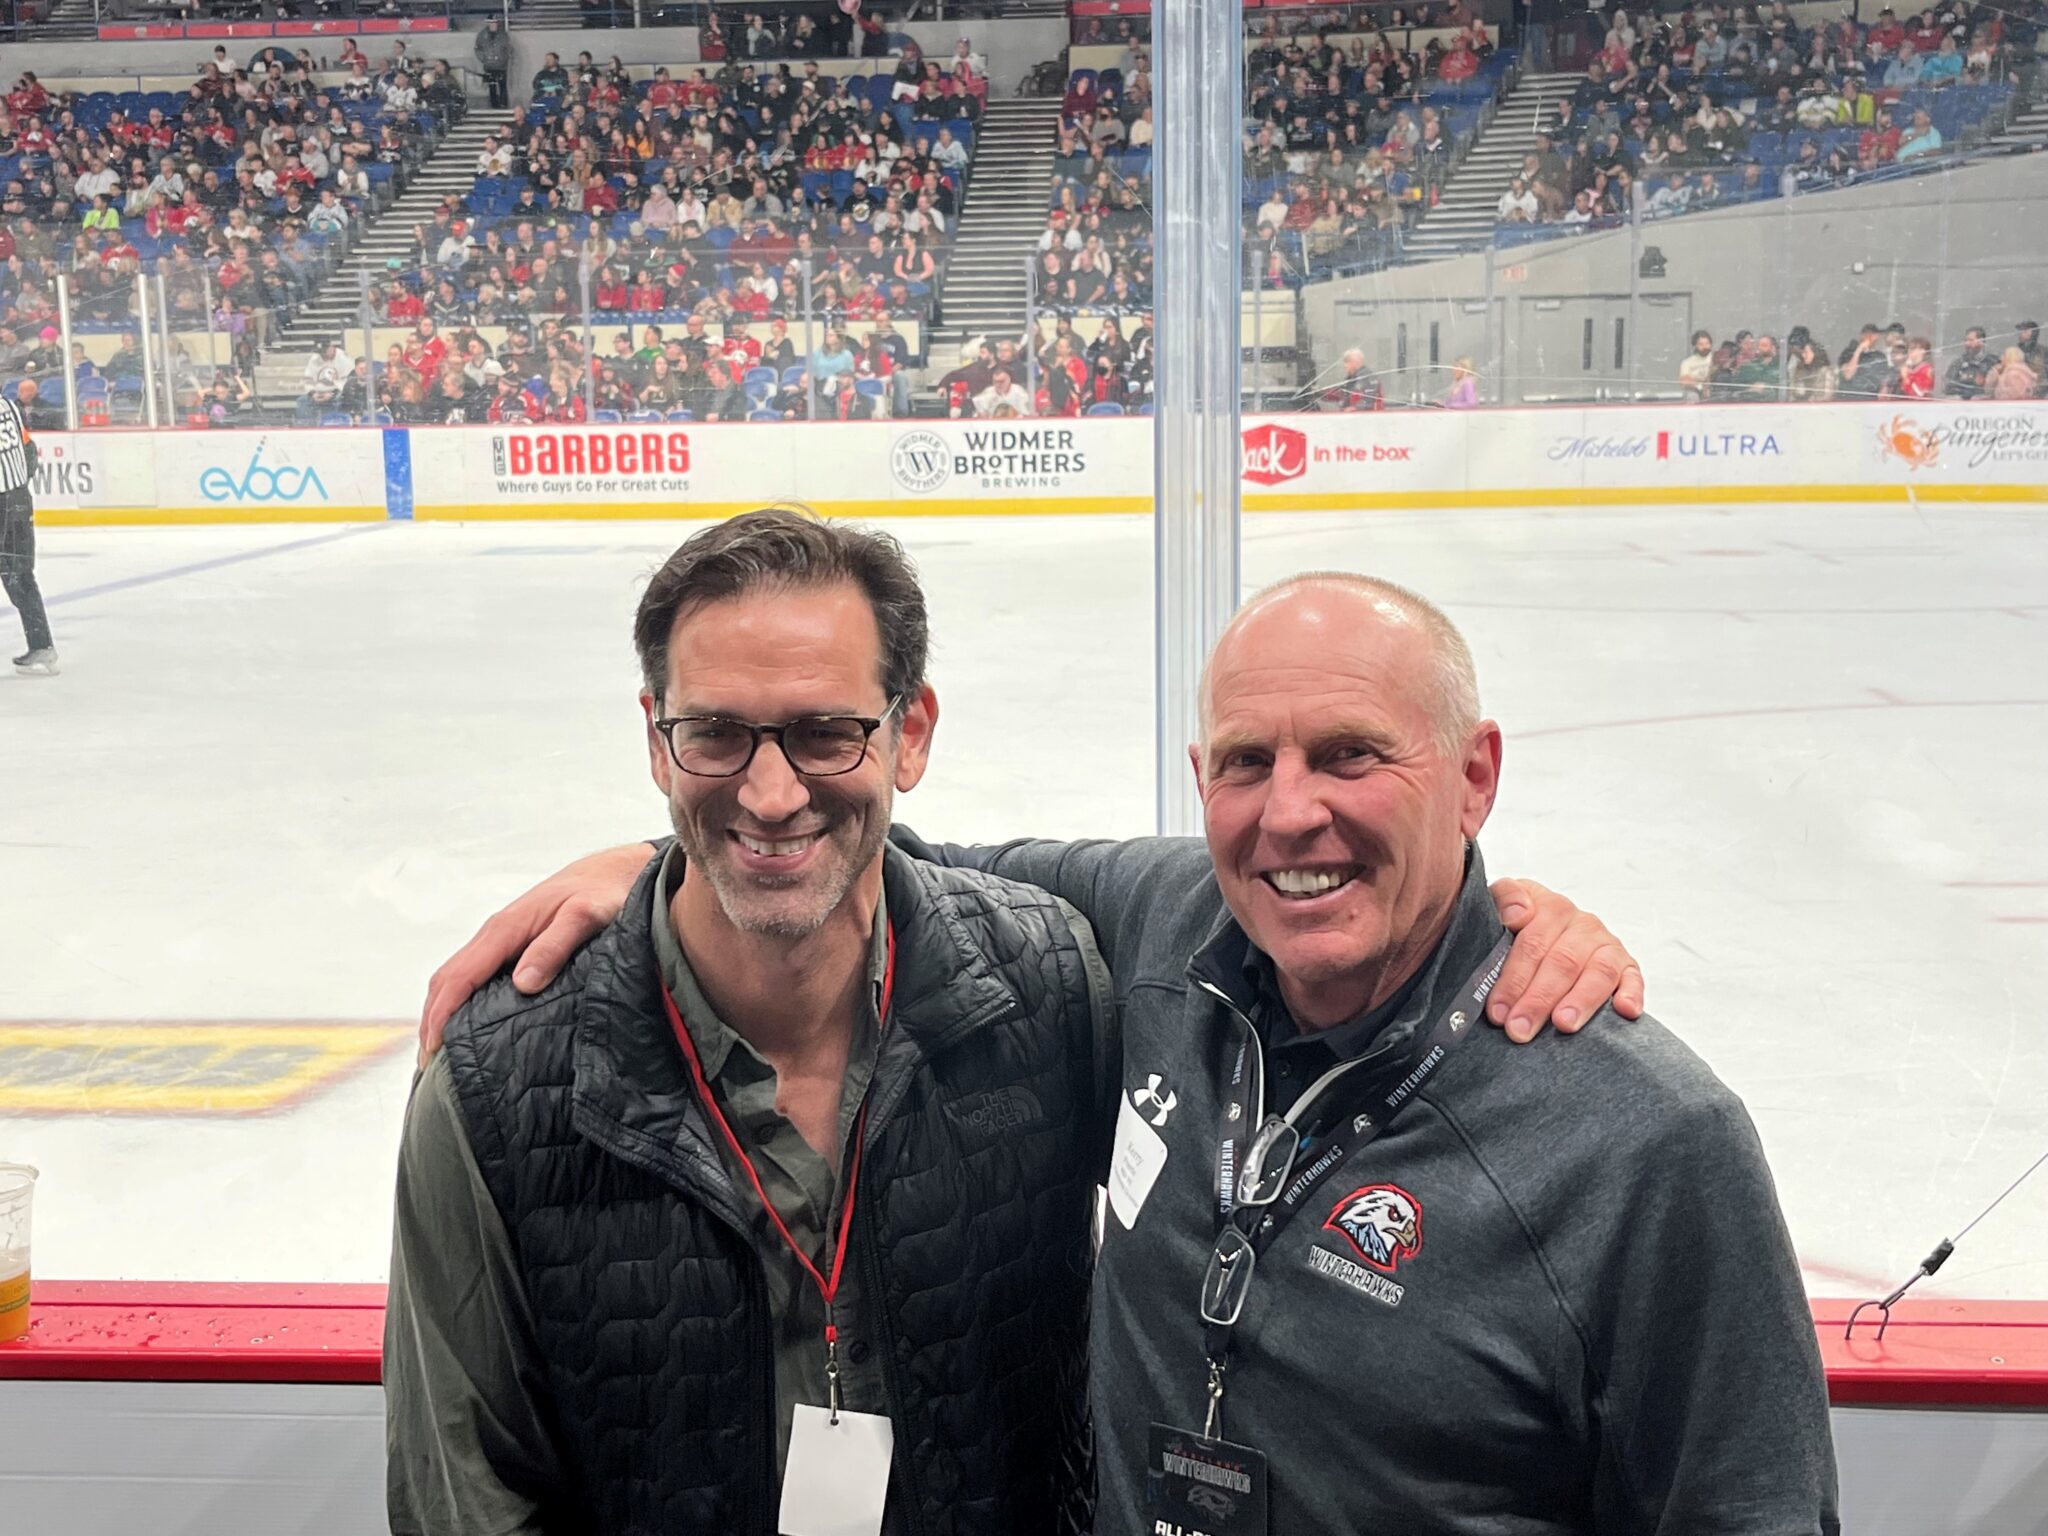 Washington University medical oncologist Russell Pachynski, MD, and his patient Kerry Preete attend a St. Louis Blues game together.